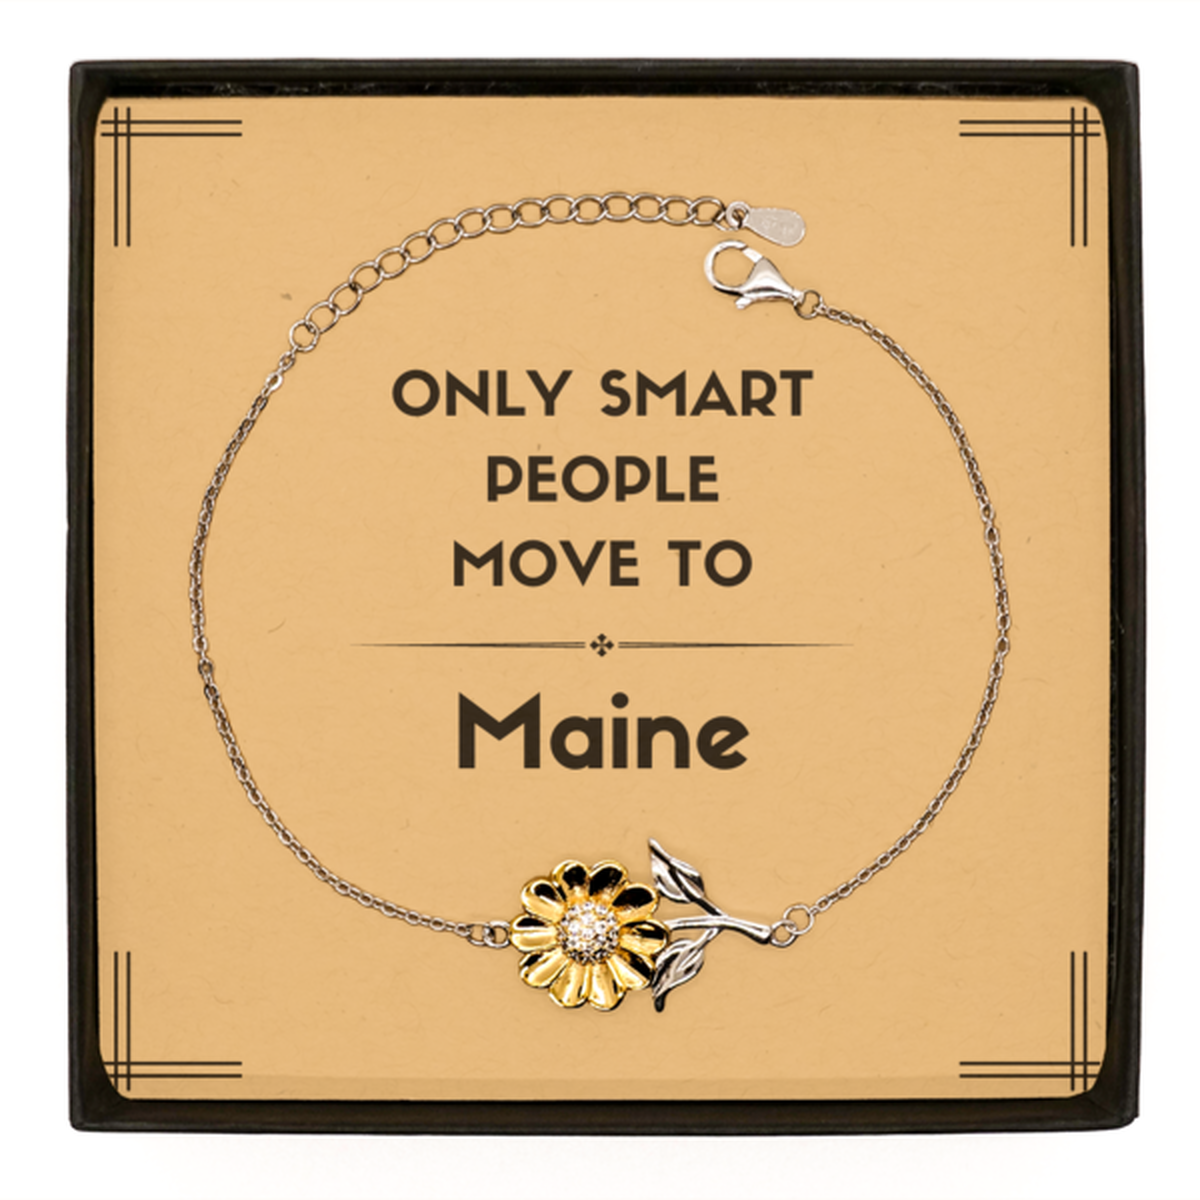 Only smart people move to Maine Sunflower Bracelet, Message Card Gifts For Maine, Move to Maine Gifts for Friends Coworker Funny Saying Quote